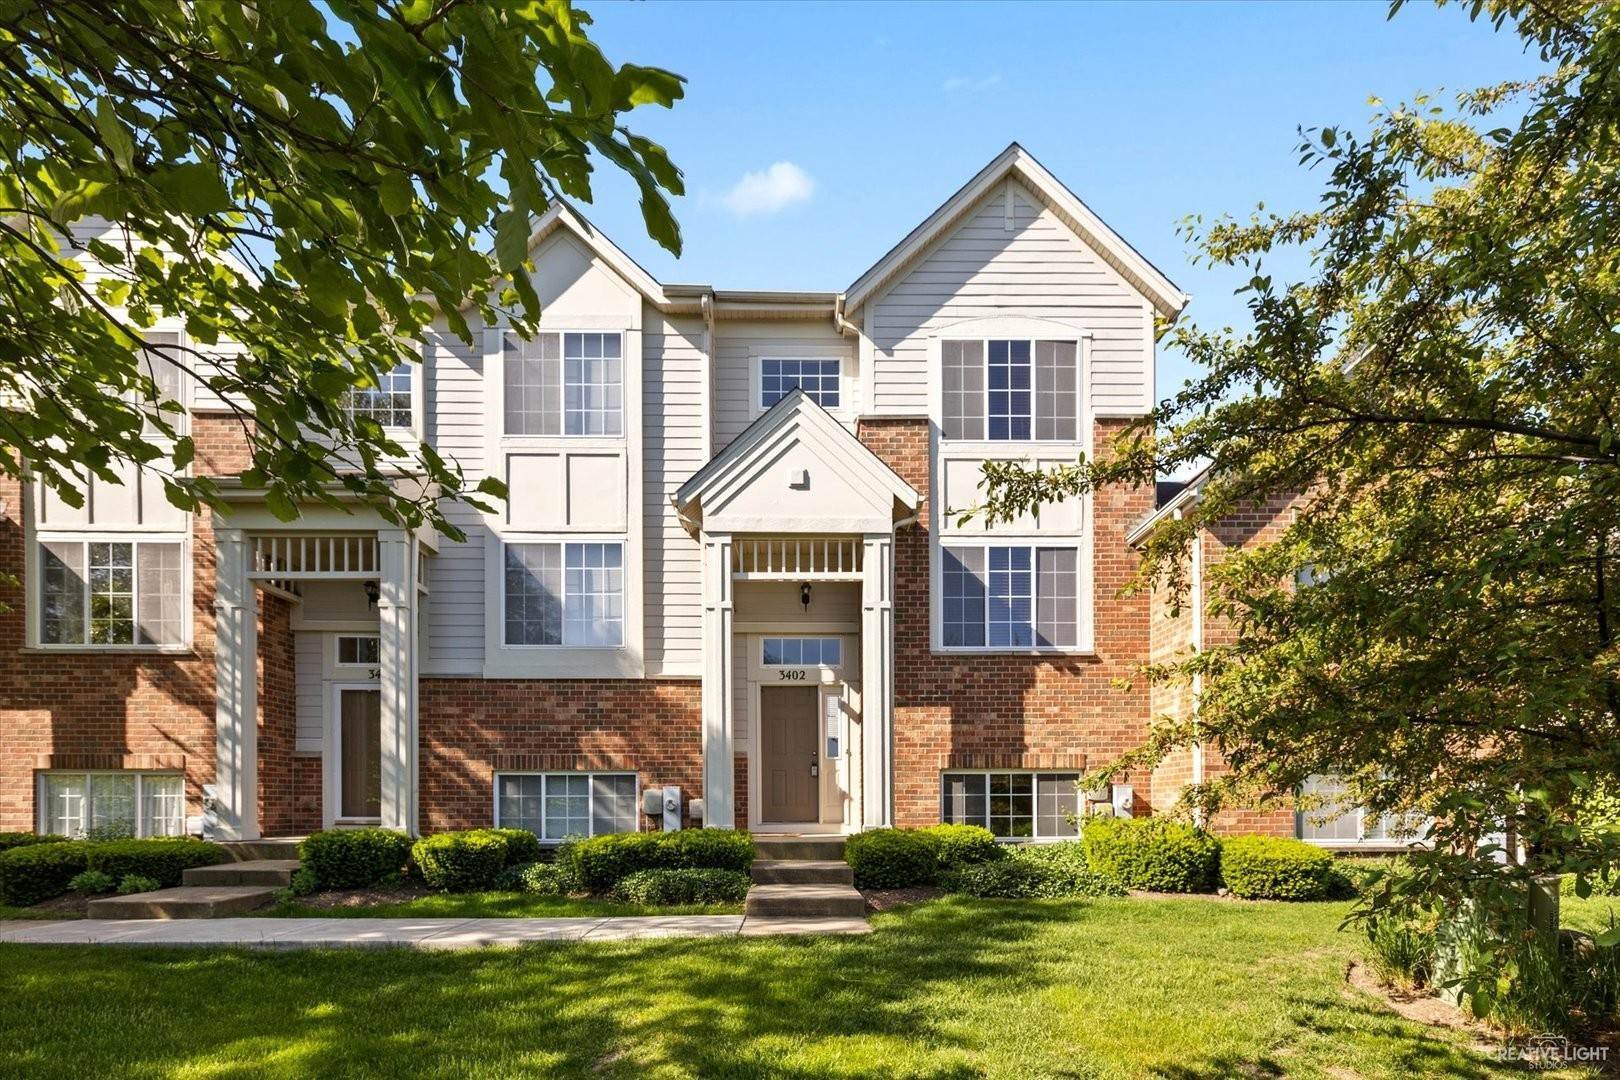 Townhouse at Elgin, IL 60124